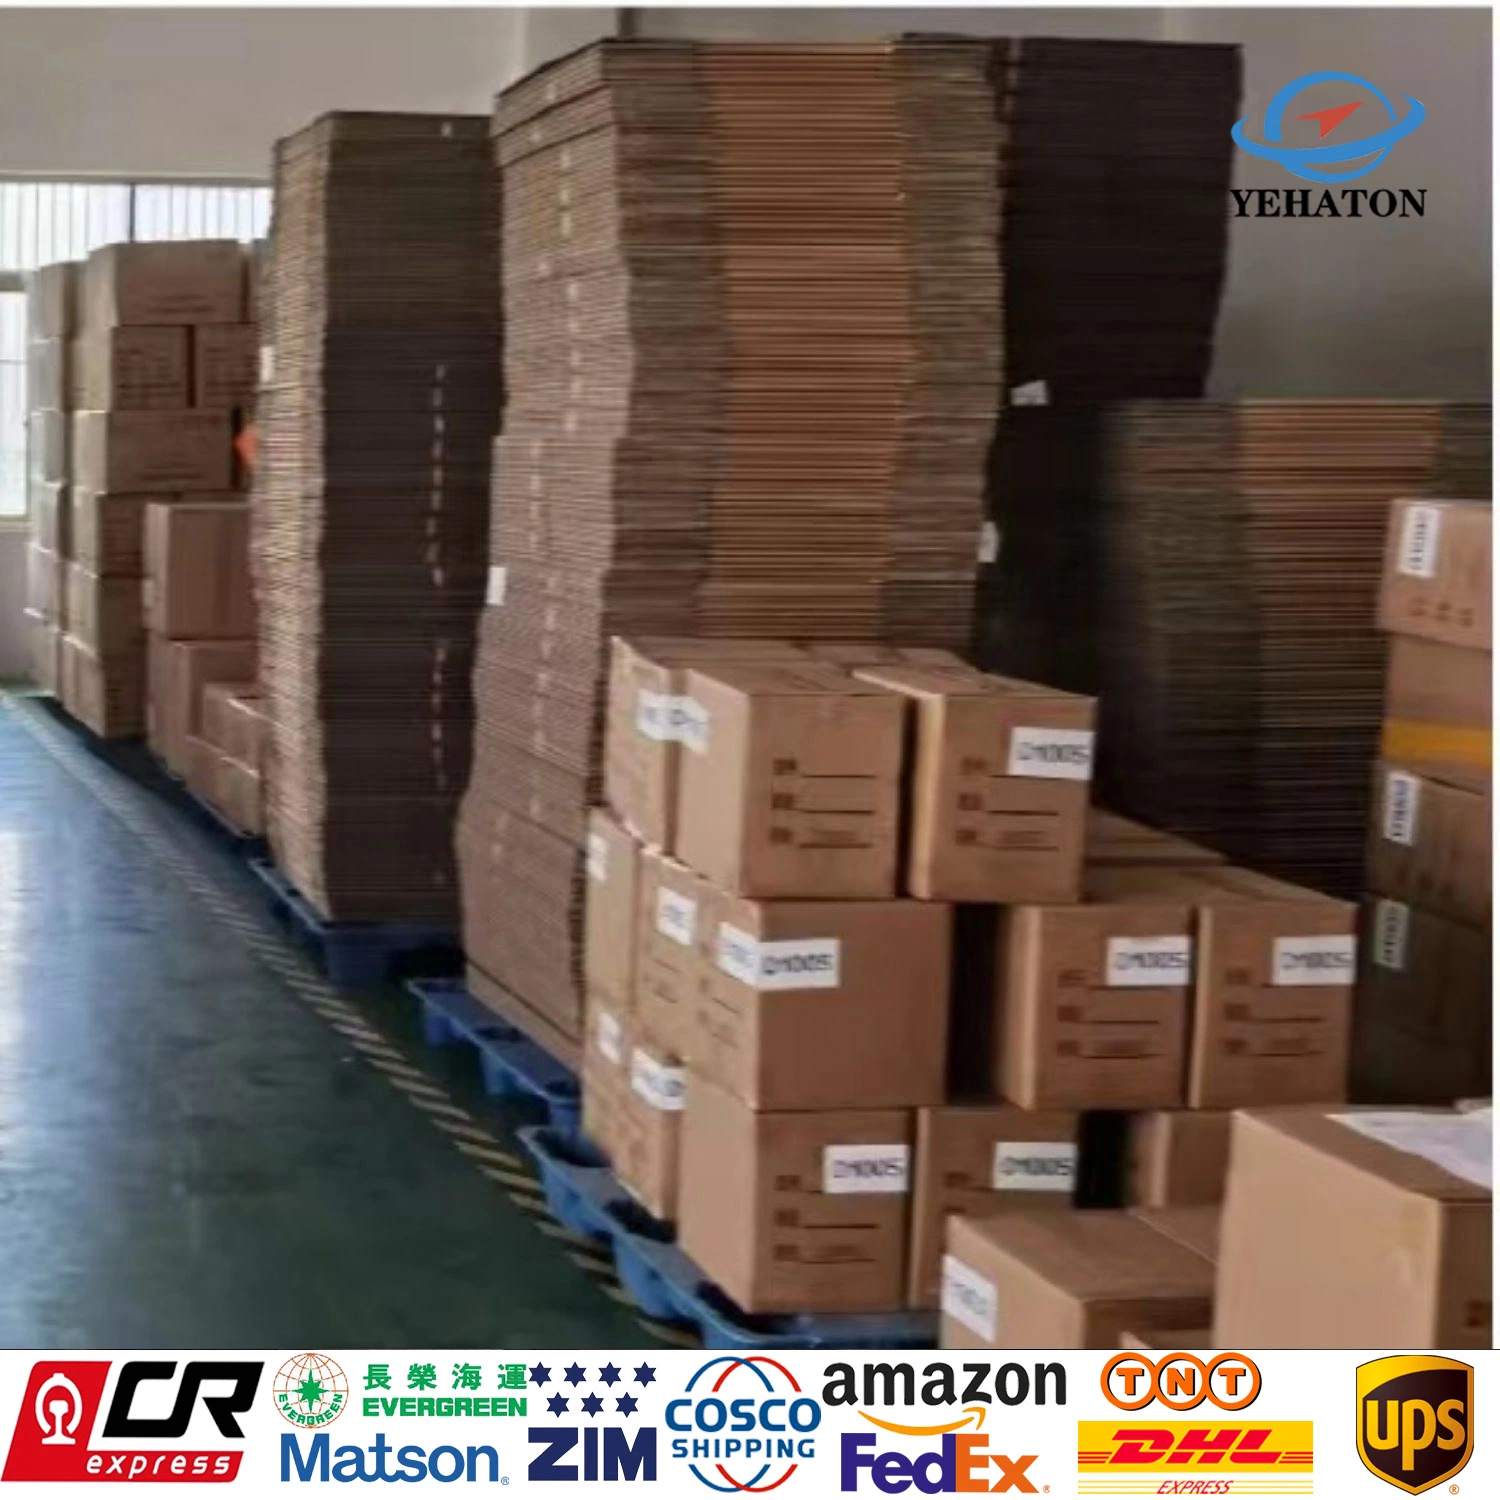 Fast, Safe and Reliable Fba Amazon Freight Forwarder Logistics Company, Express Delivery China Shipping Agent to Dallas/Canada